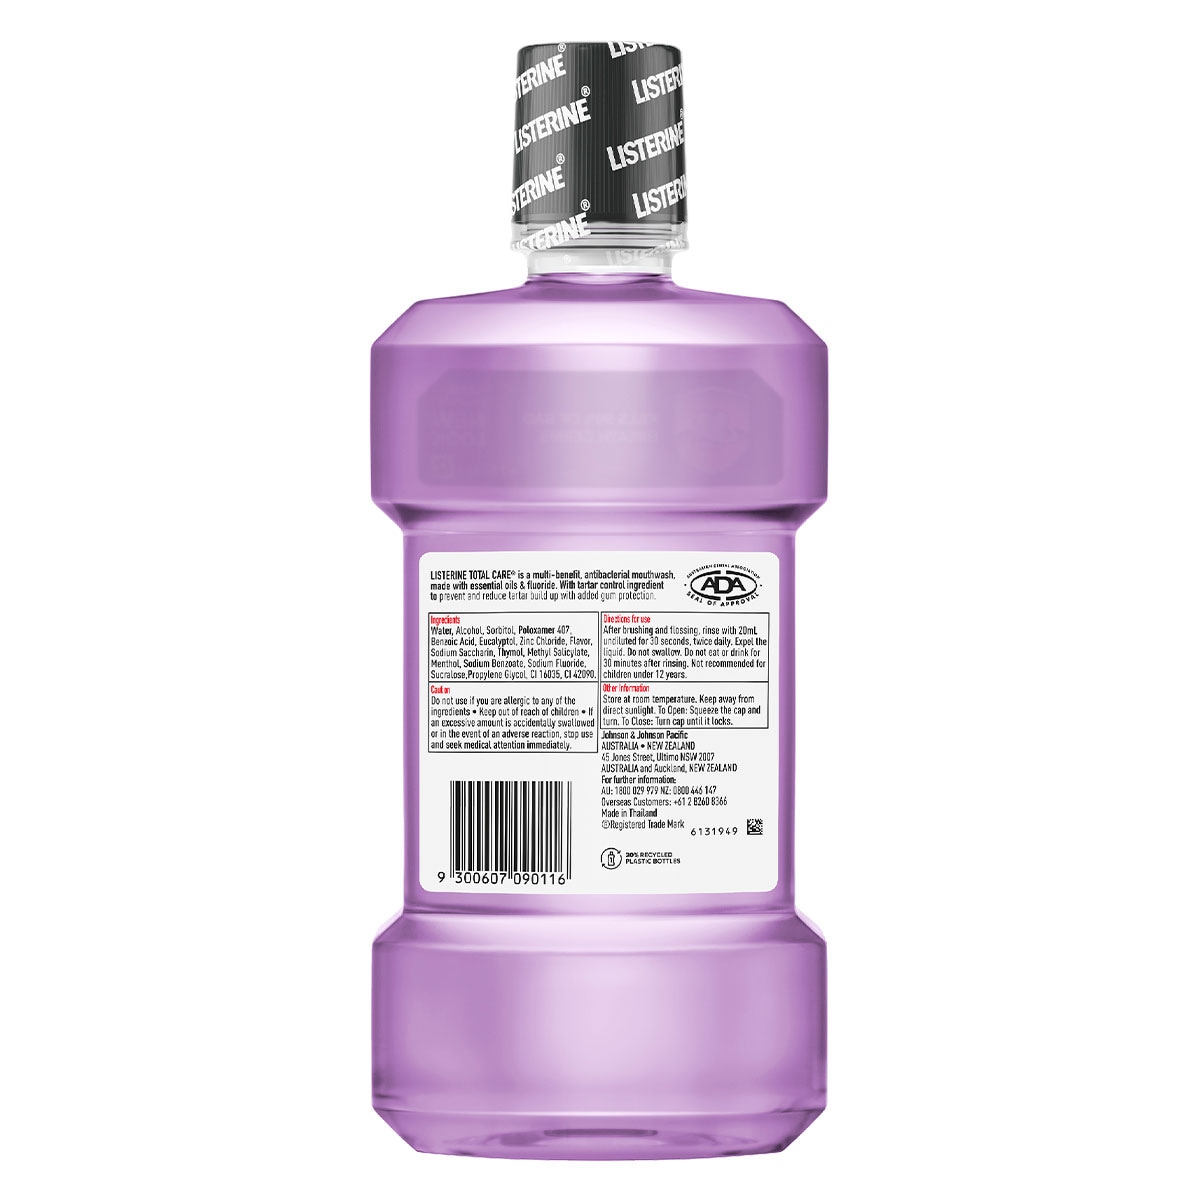 Listerine Total Care 6 in 1 Antibacterial Mouthwash 1 Litre